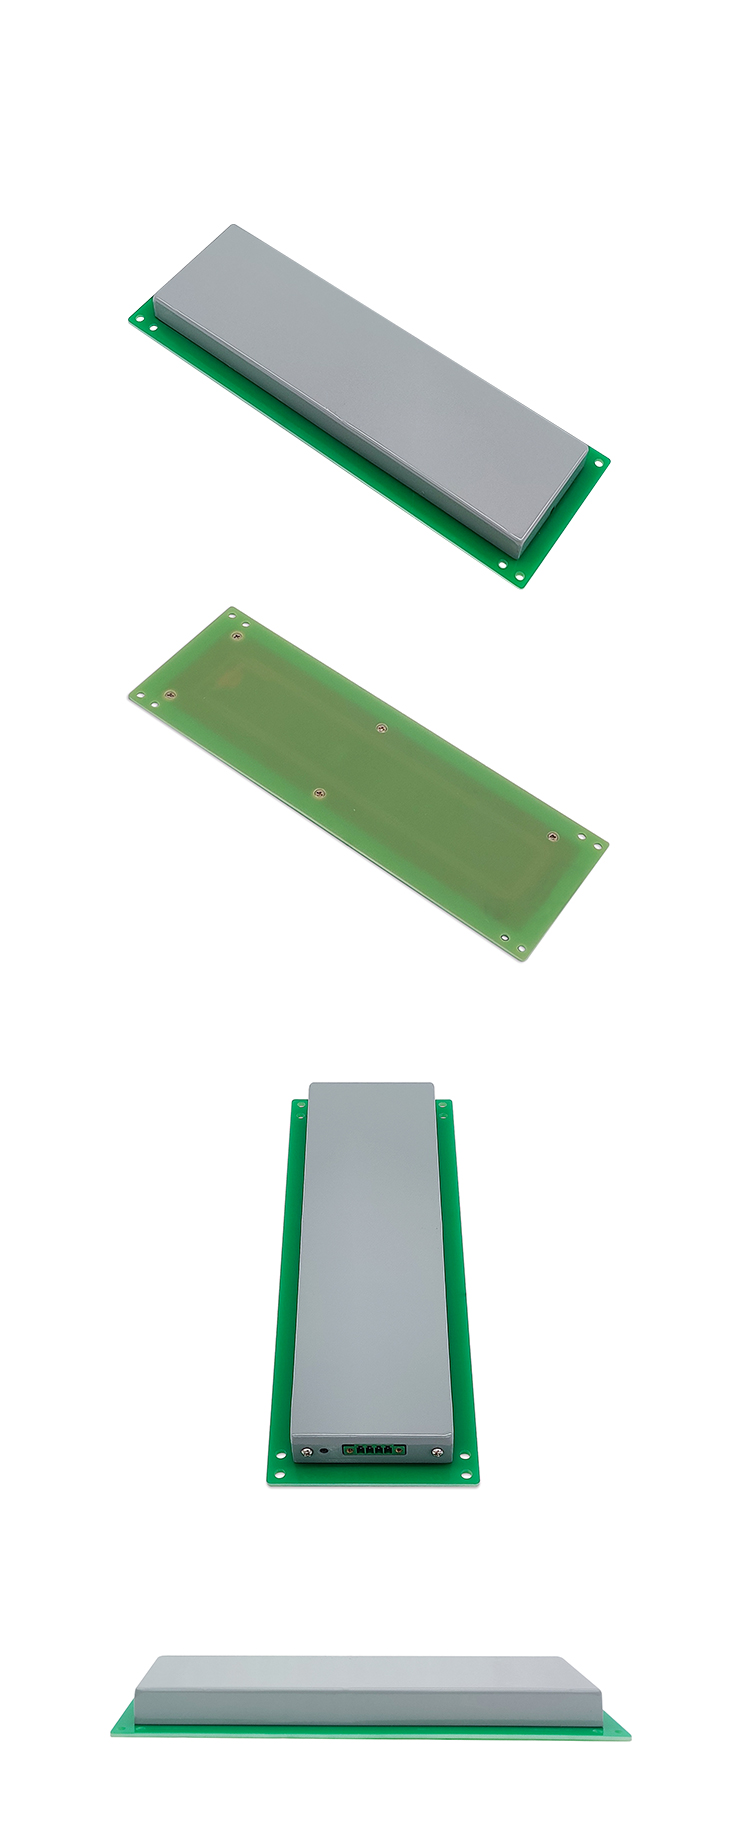 13.56MHz Embedded RFID Reader Integrated With Antenna Metal Shielding Design